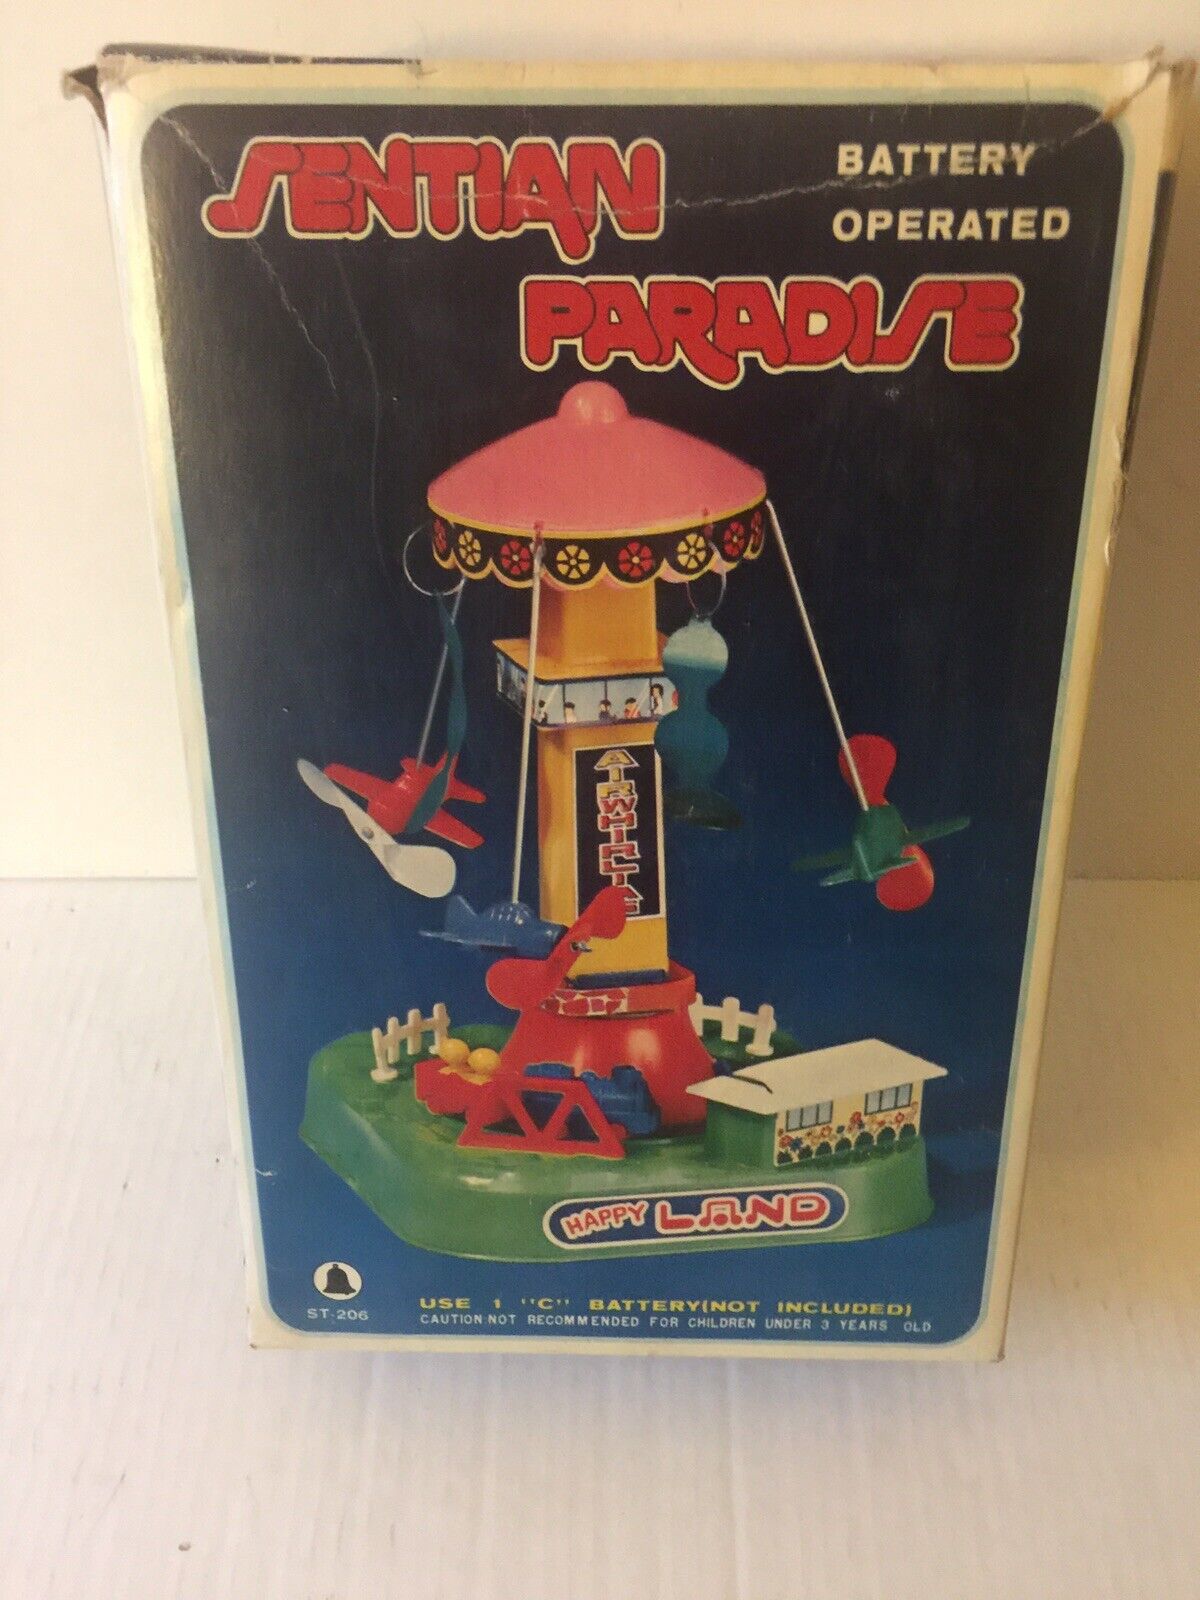 VINTAGE BATTERY OPERATED SENTIAN PARADISE HAPPY LAND (COMPLETE)